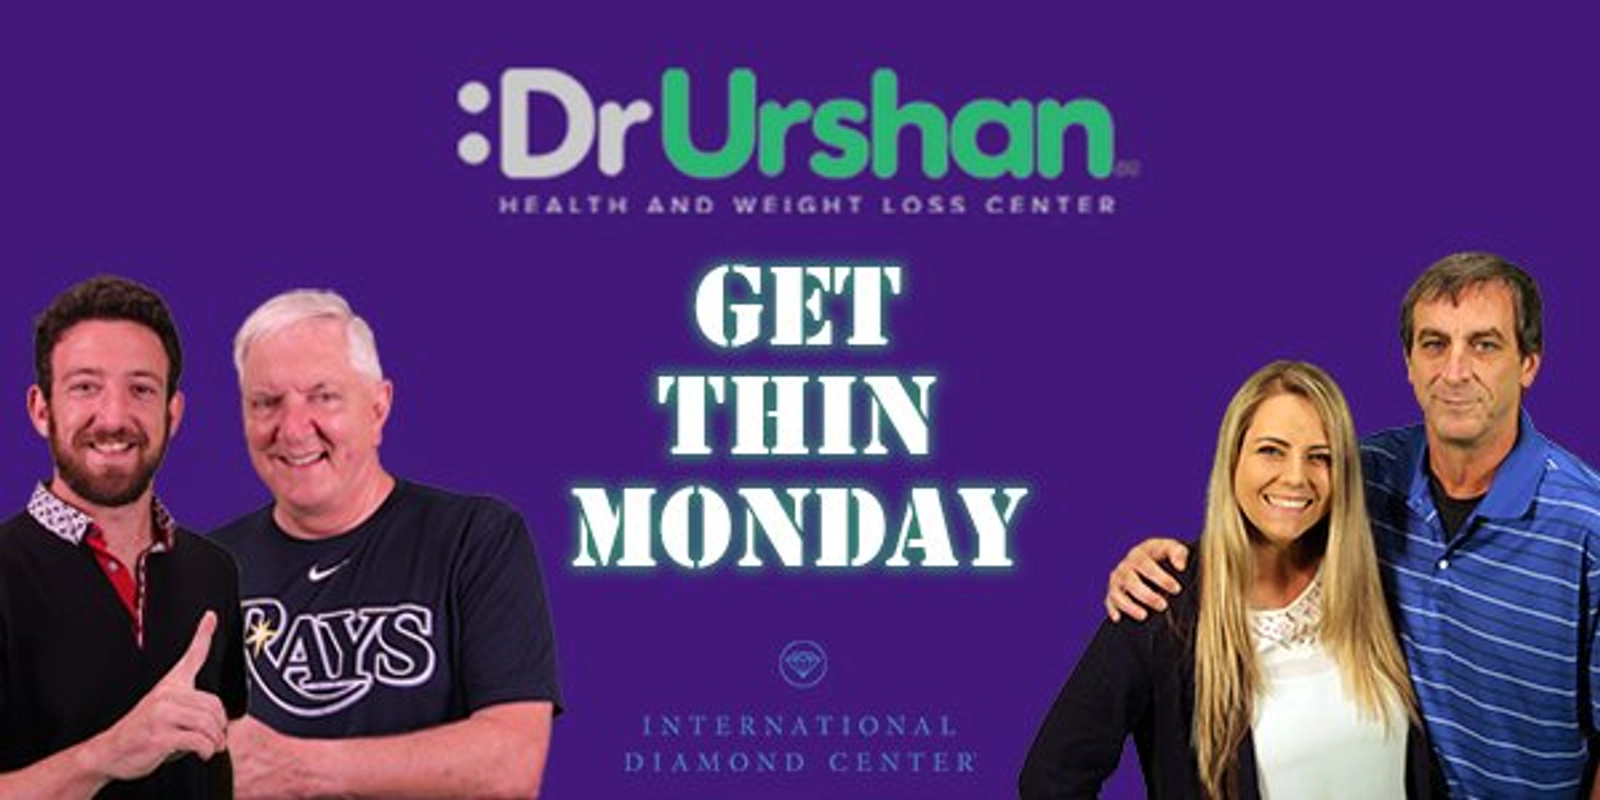  Win a 40 Day Weight Loss Program from Dr. Urshan - Thumbnail Image